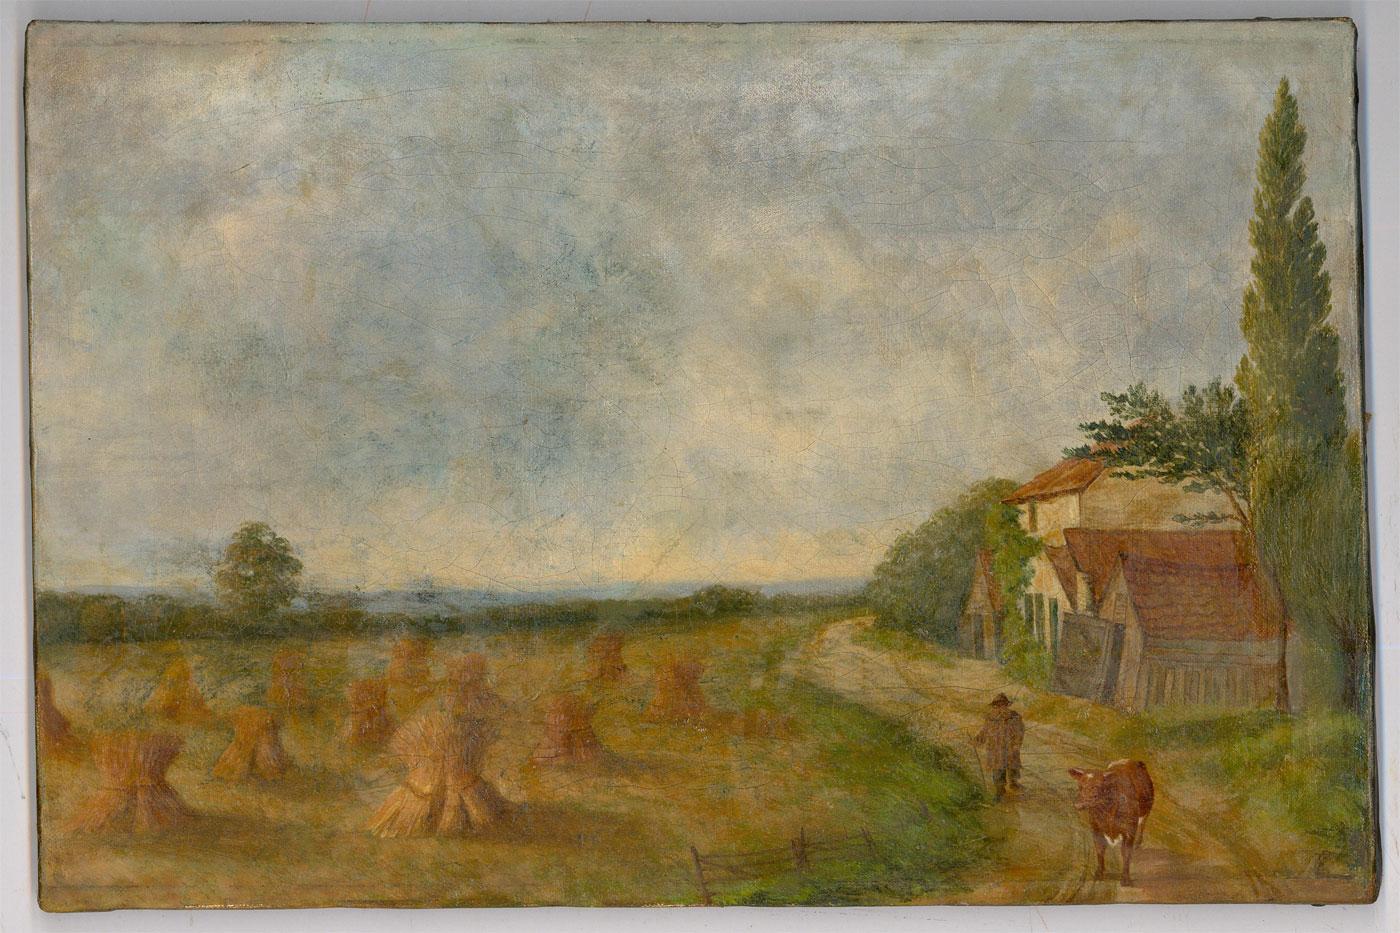 A charming late 19th century oil, depicting a busy cattle farmer returning an escapee to its field. A freshly cut wheat field spans the left of the scene with stocks of straw stood out to dry. The painting has been monogrammed by the artist to the